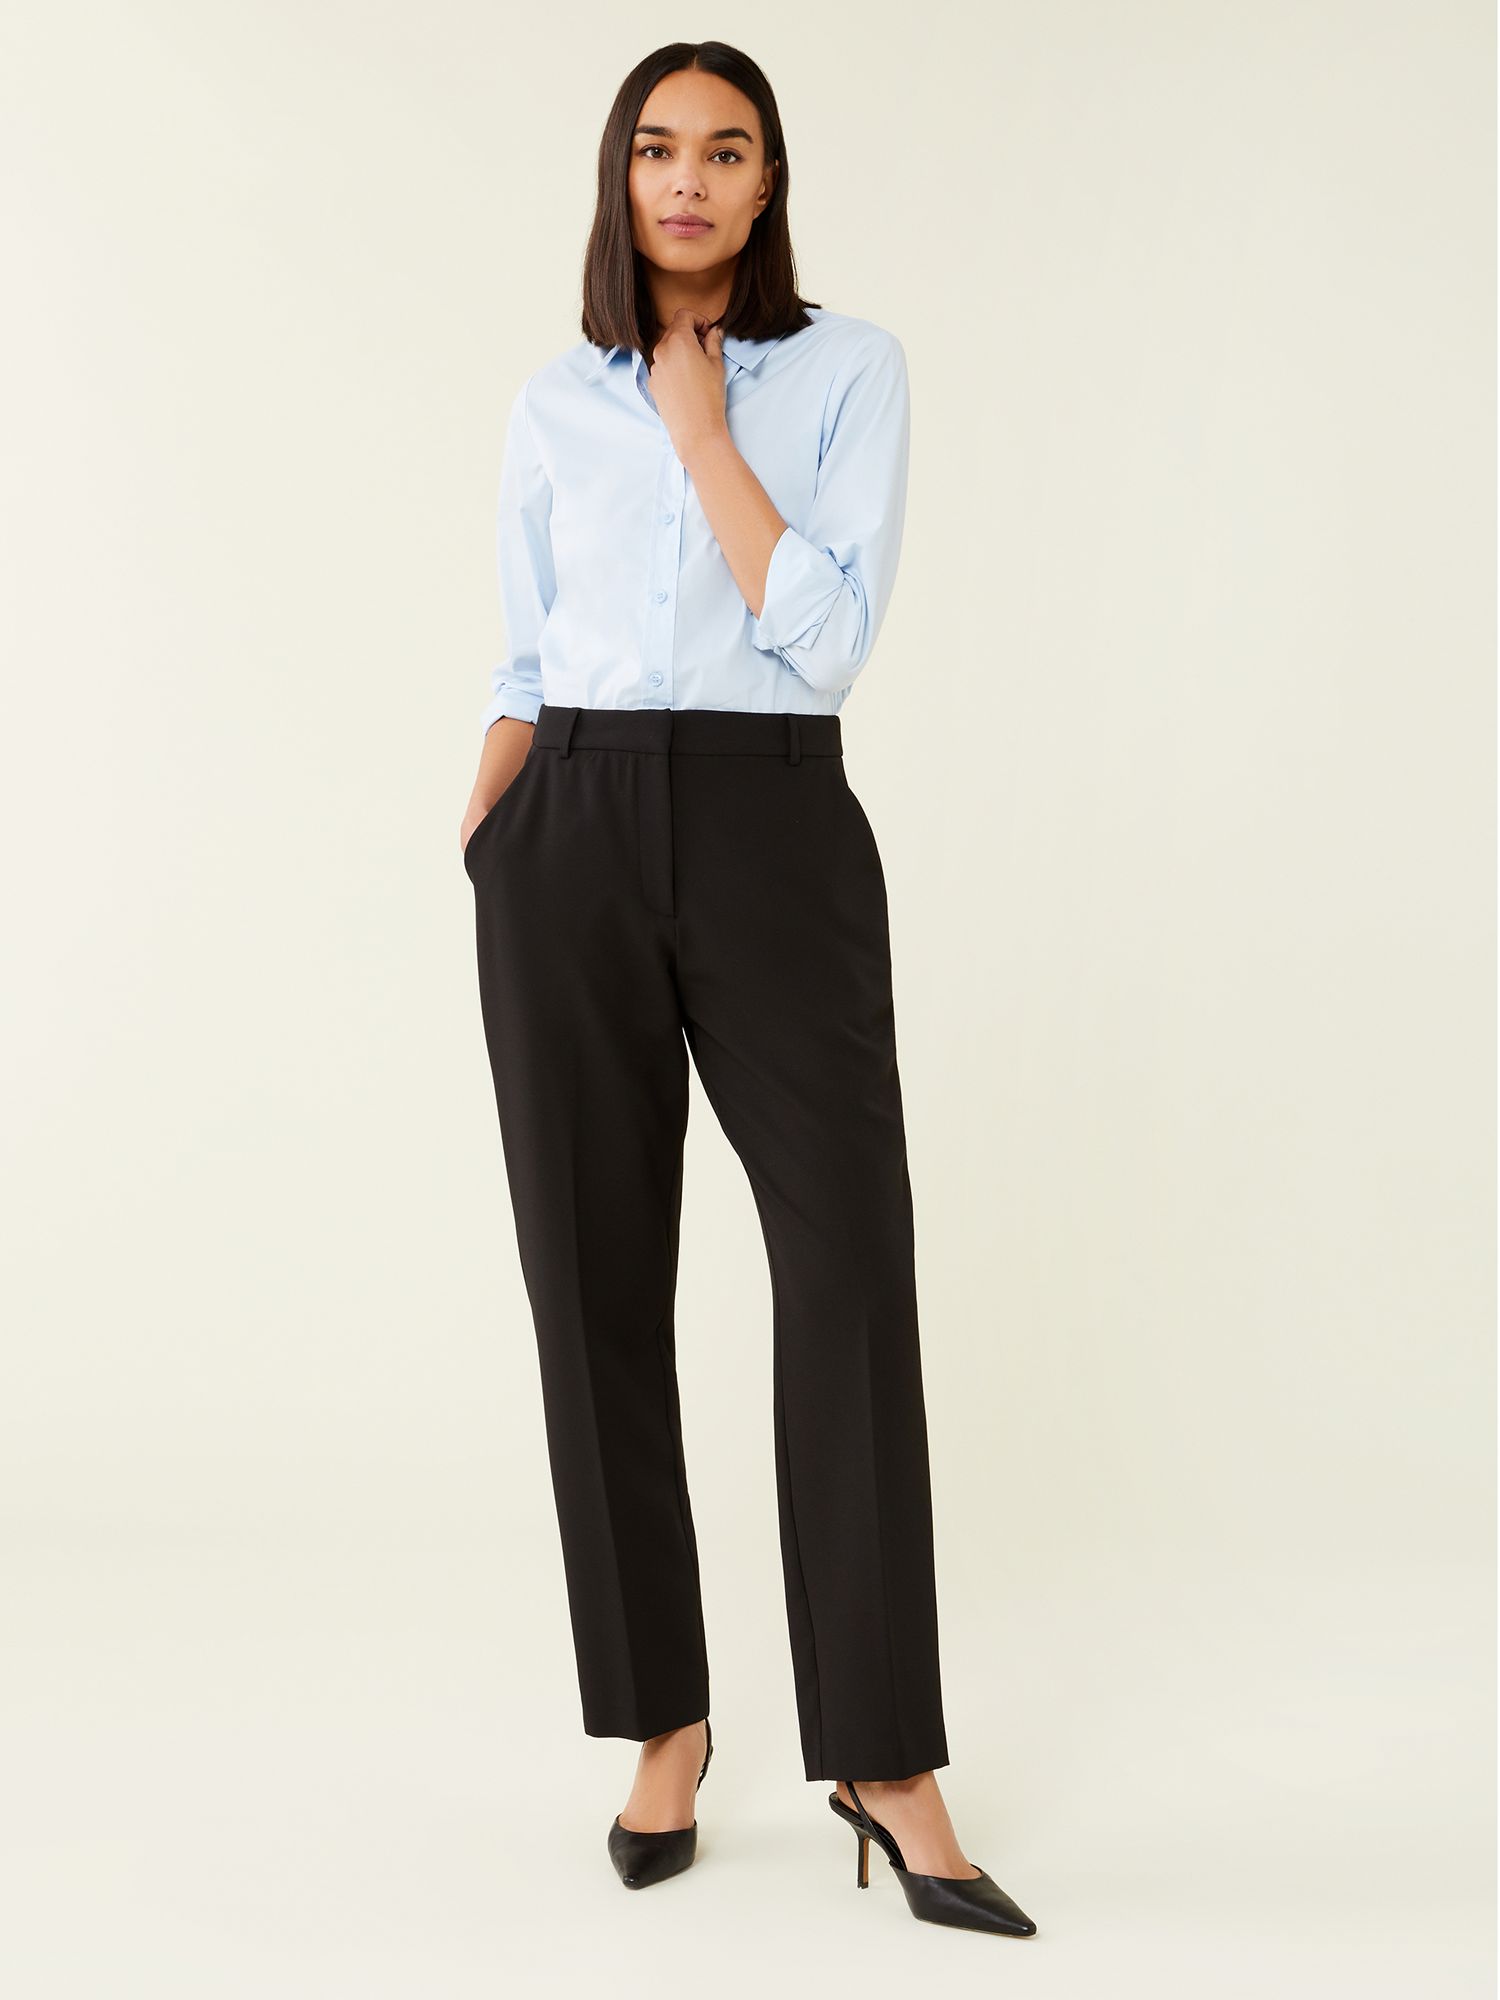 Finery Harper Tailored Trousers, Black at John Lewis & Partners